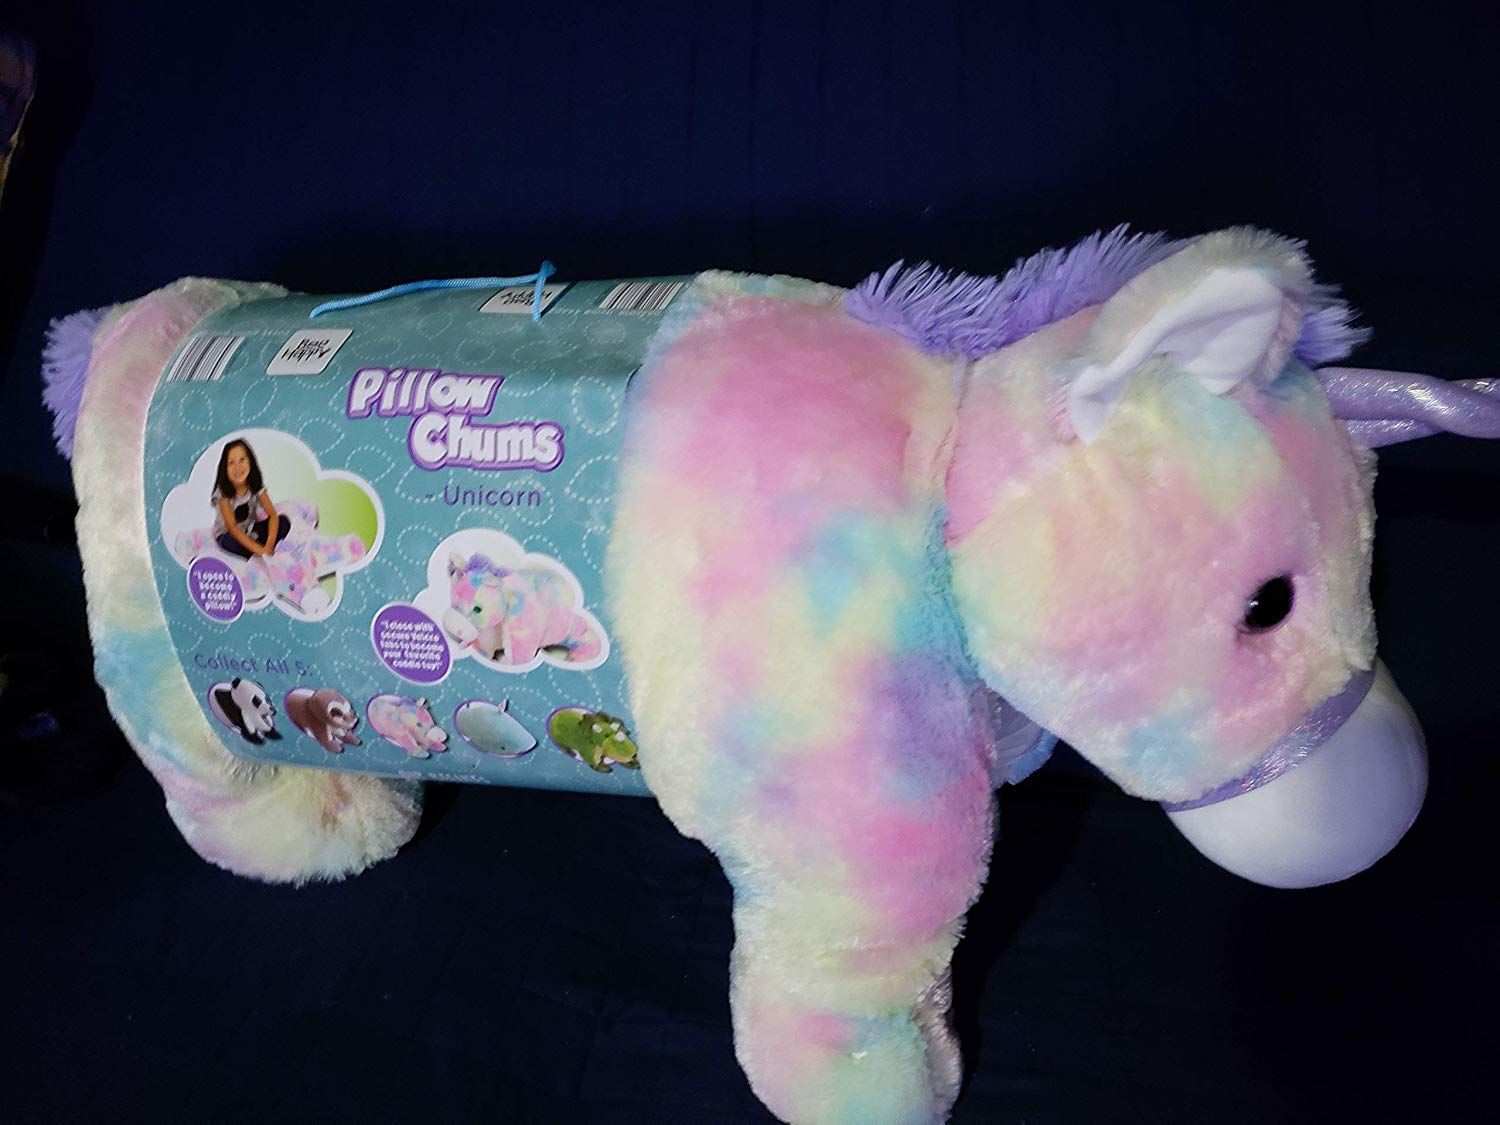 Kelly Toy 30" Bee Happy Collection, Pillow Chum Unicorn